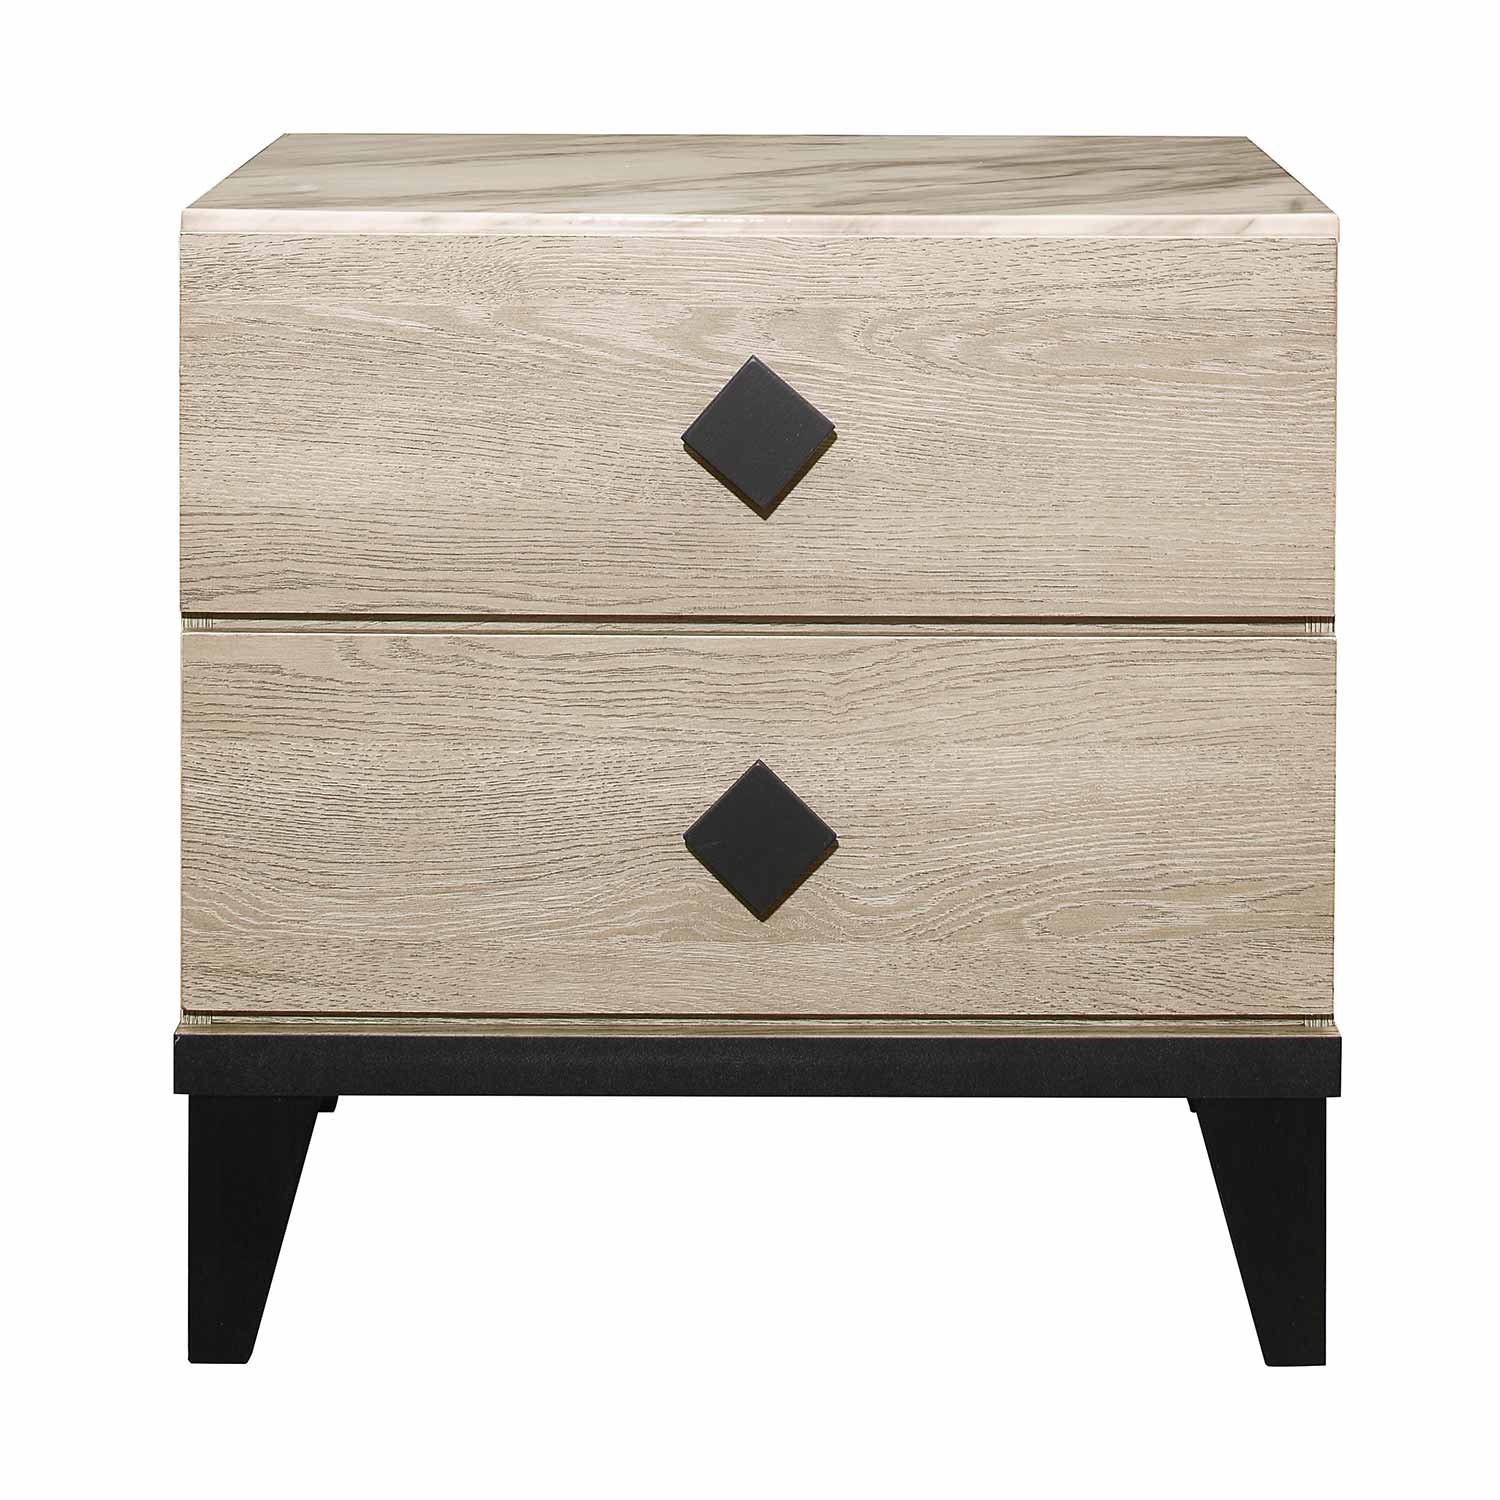 Homelegance Whiting Night Stand - Cream and Black